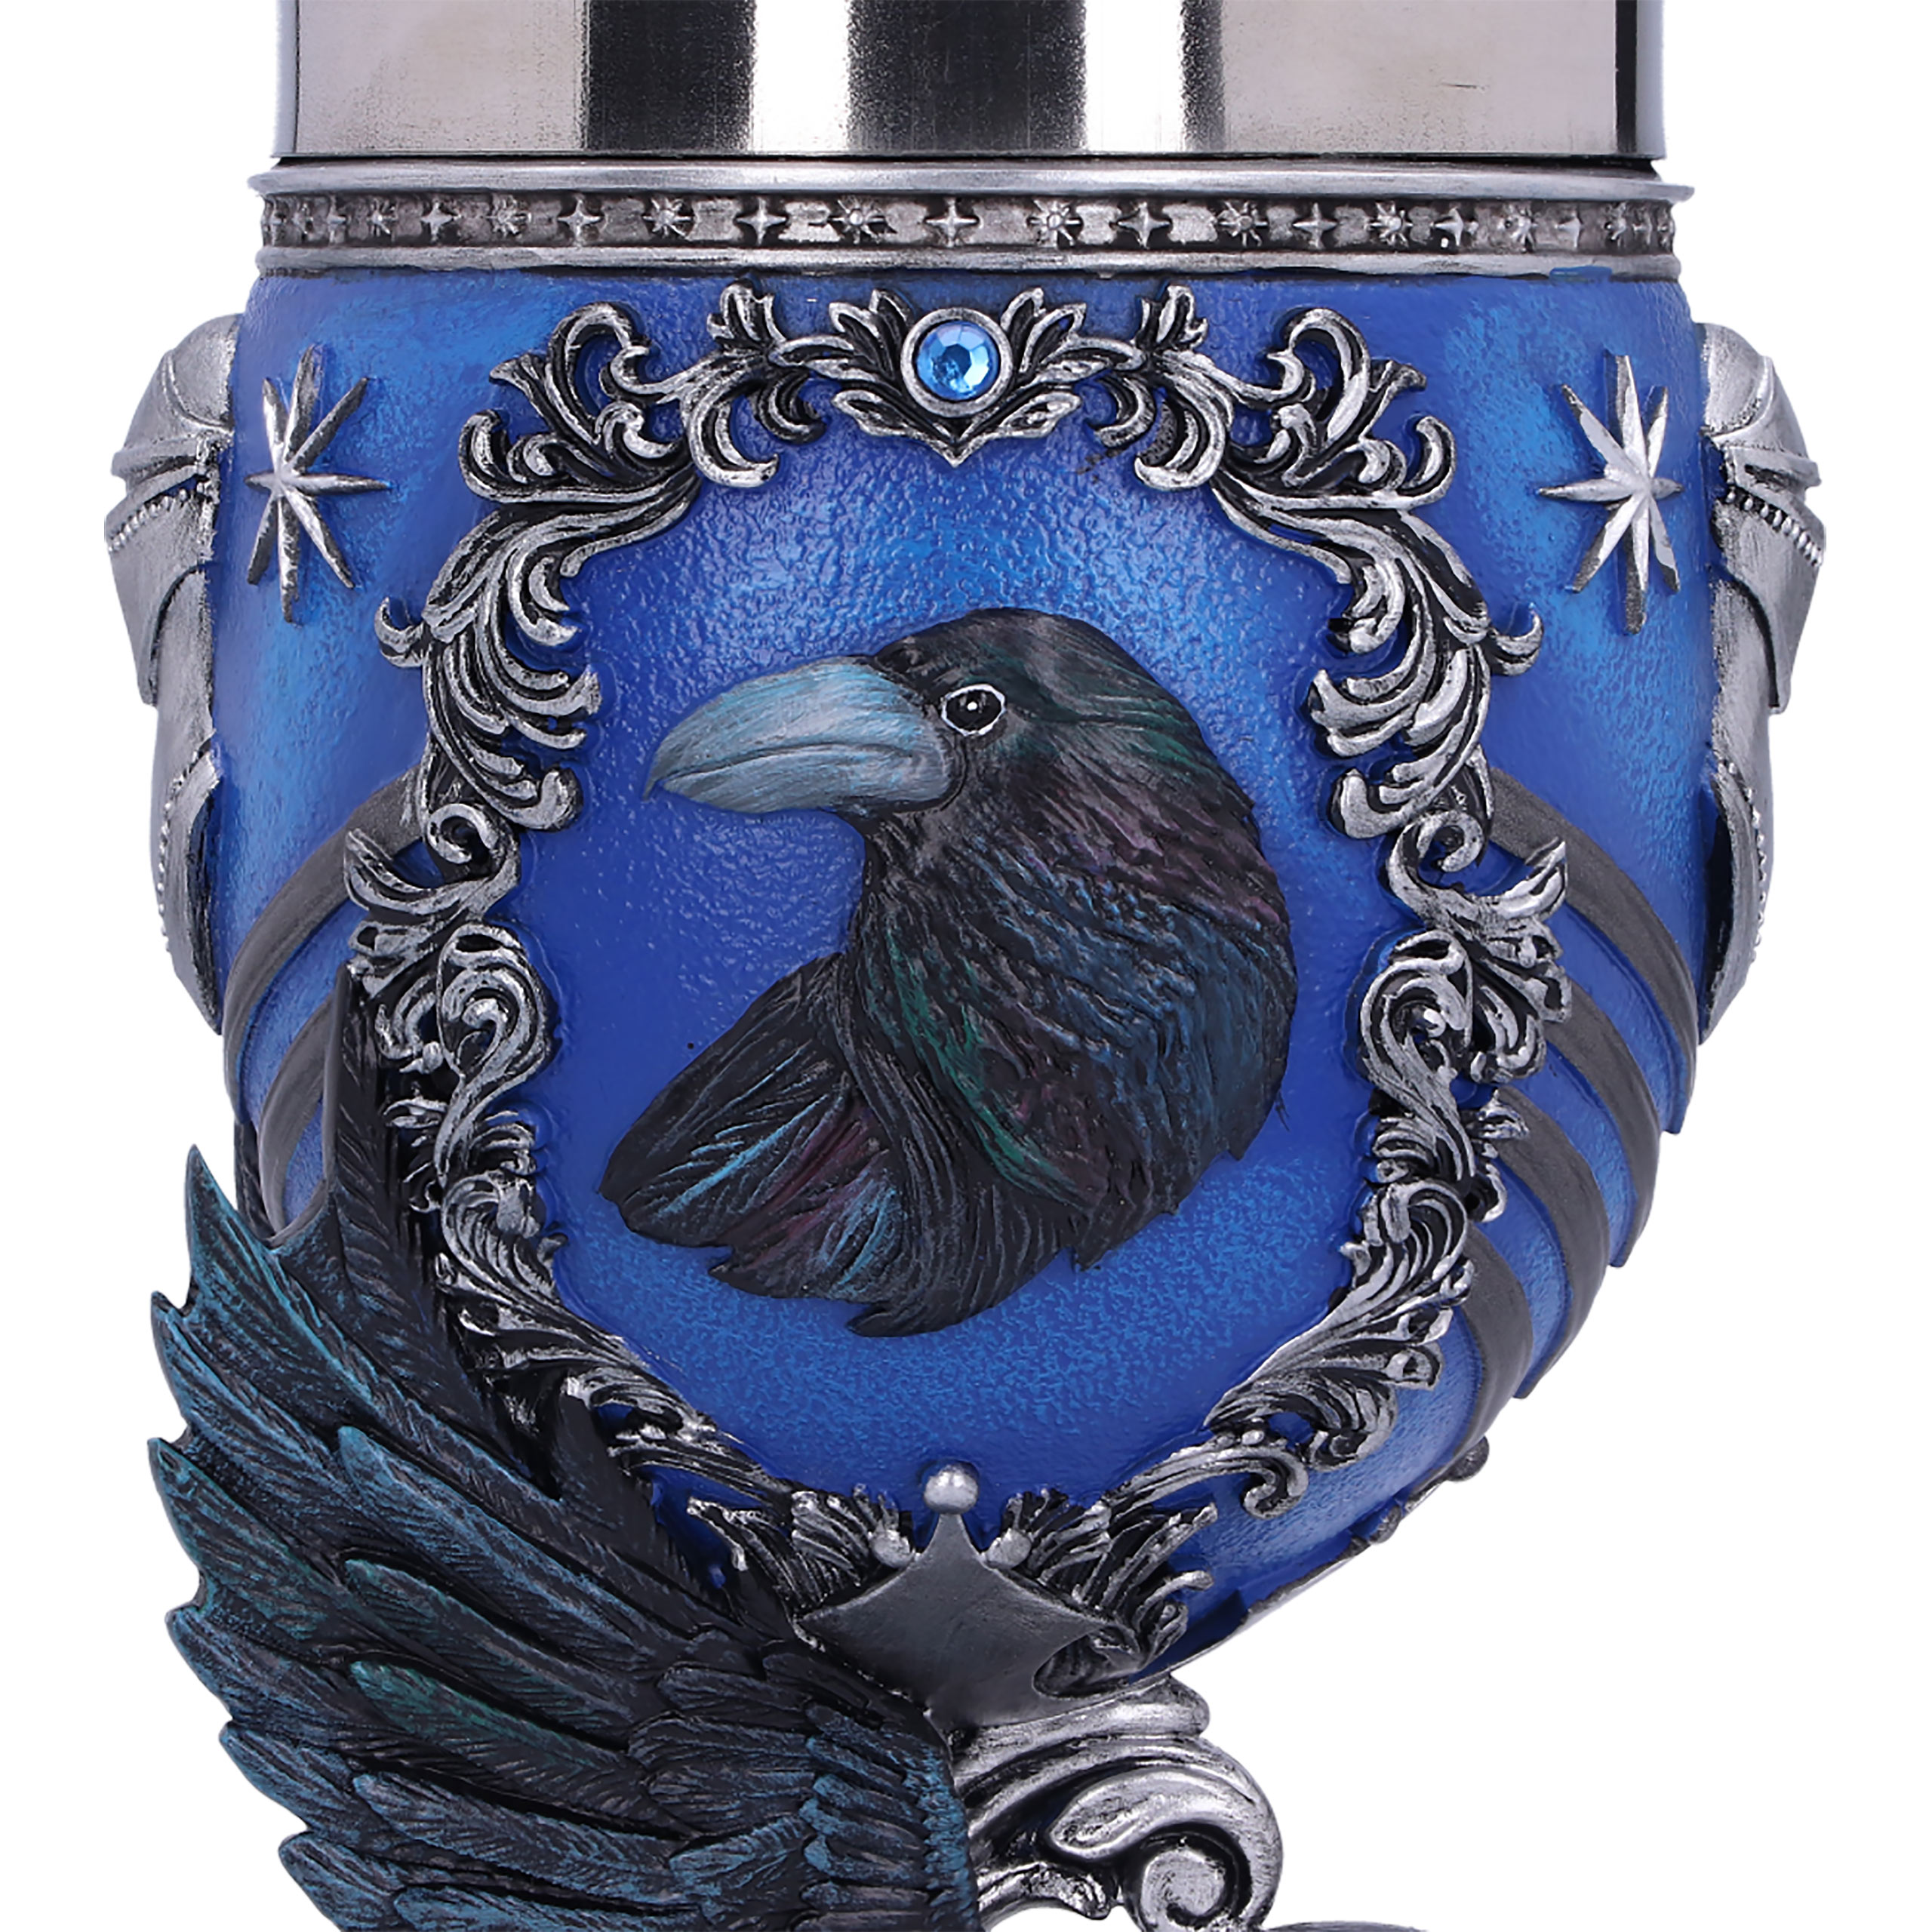 Harry Potter - Ravenclaw Logo Kelch deluxe